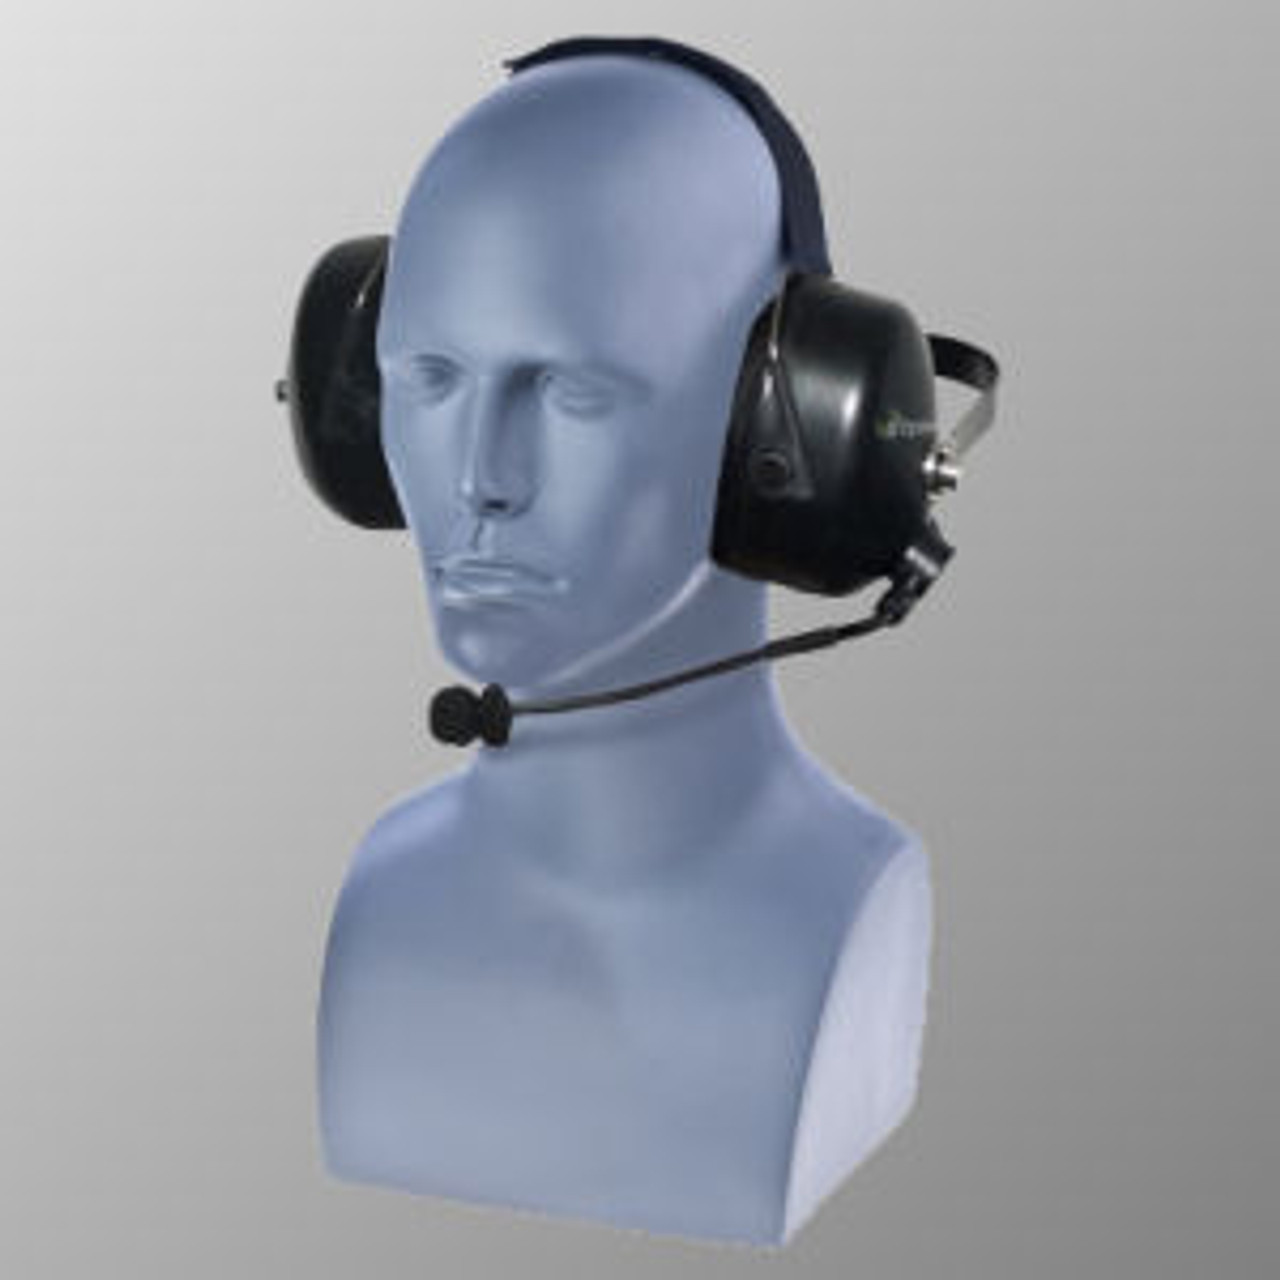 ICOM IC-F3101D Noise Canceling Double Muff Behind The Head Headset